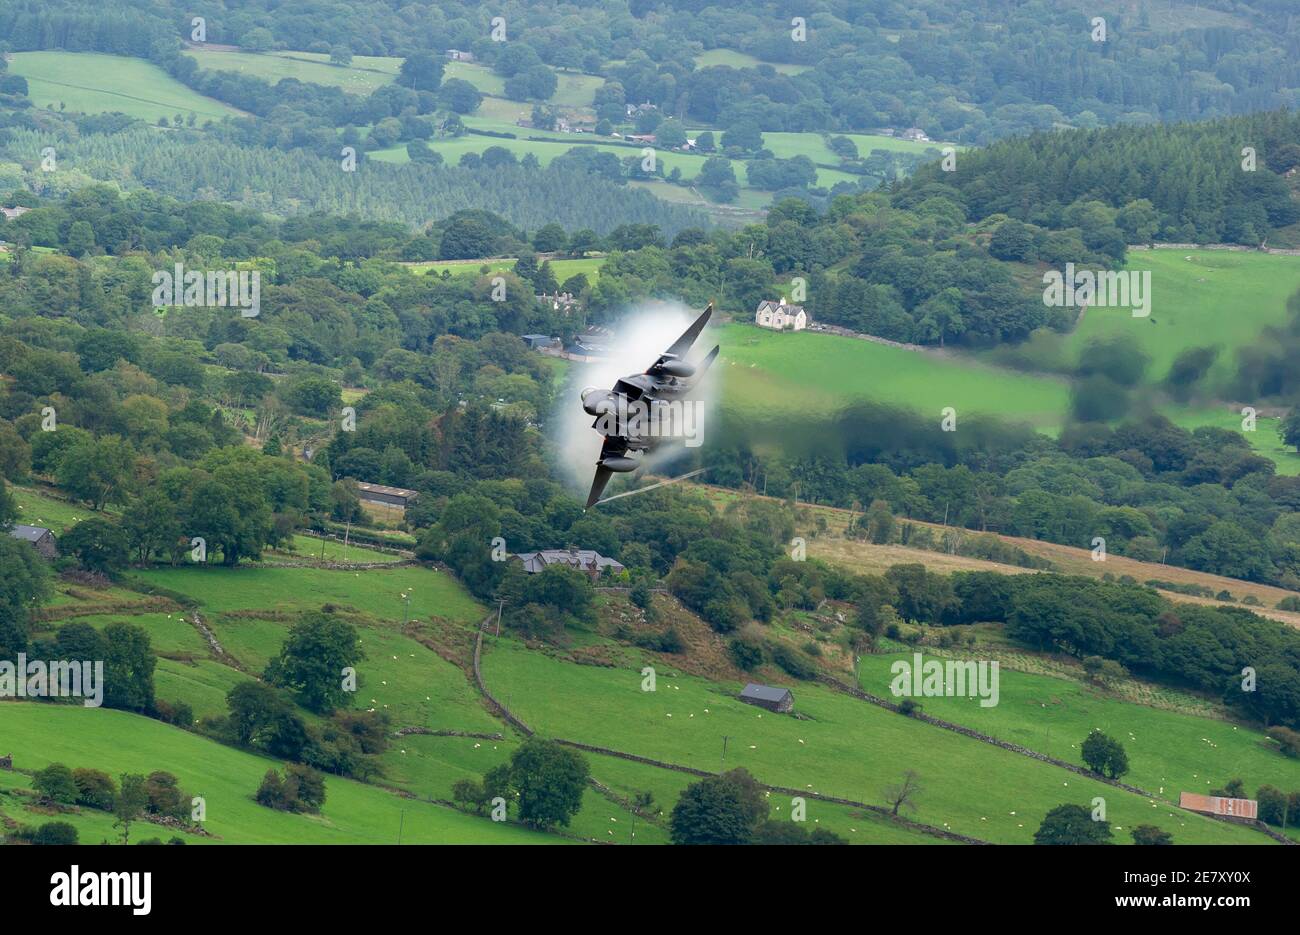 U.S Airforce F15 creating its own Cloud with Compressed water vapour, Mach loop, Wales Stock Photo